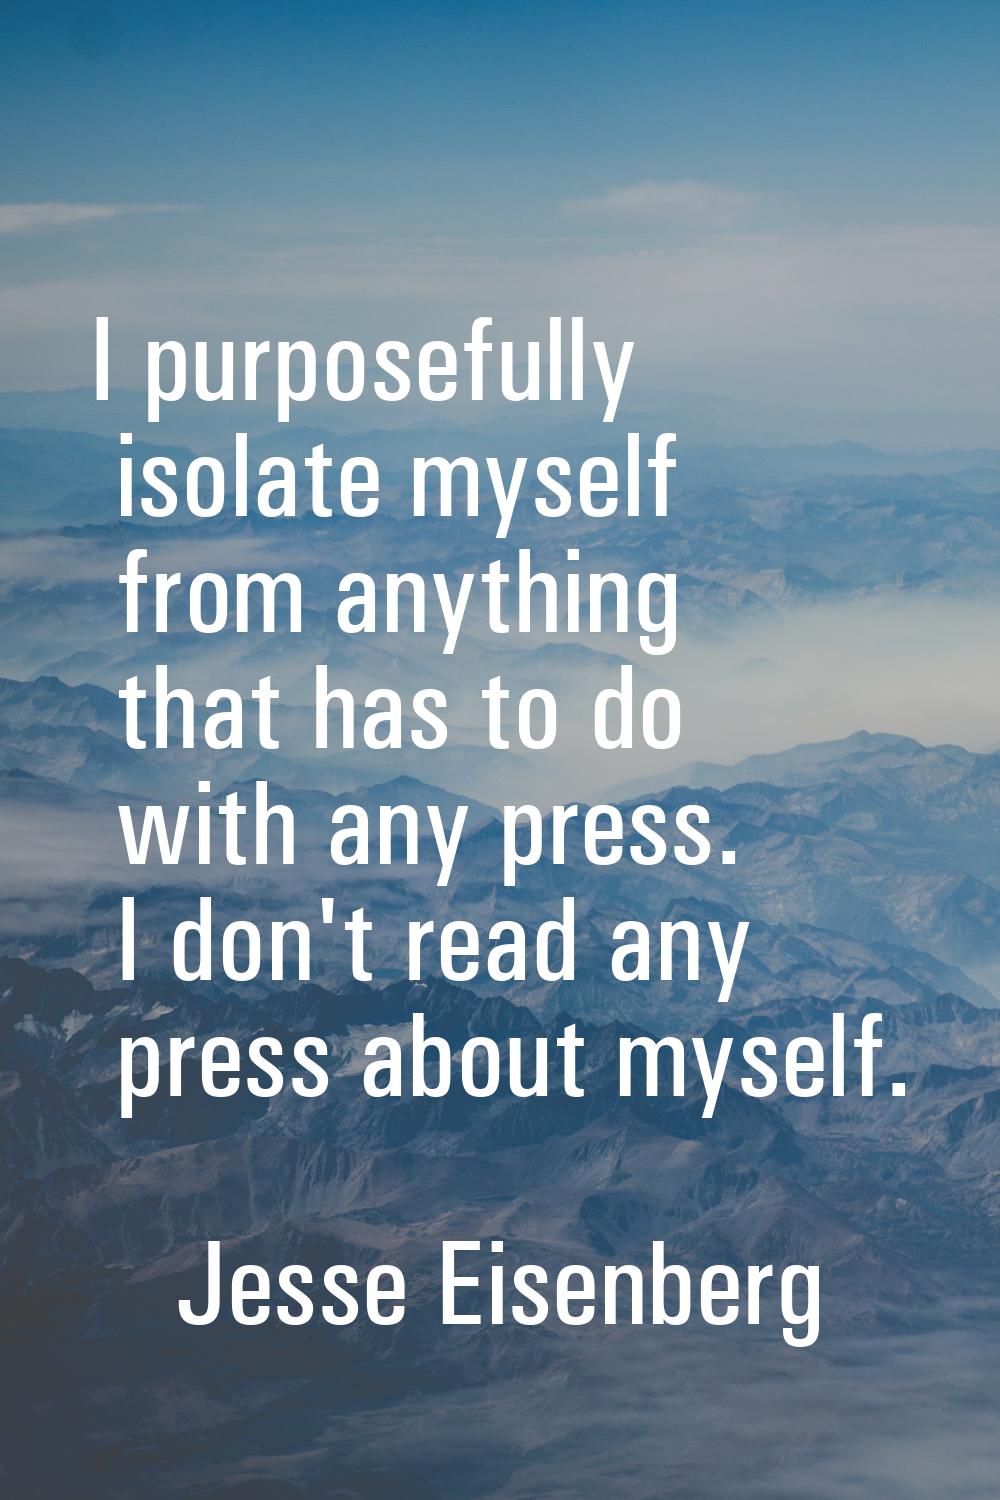 I purposefully isolate myself from anything that has to do with any press. I don't read any press a